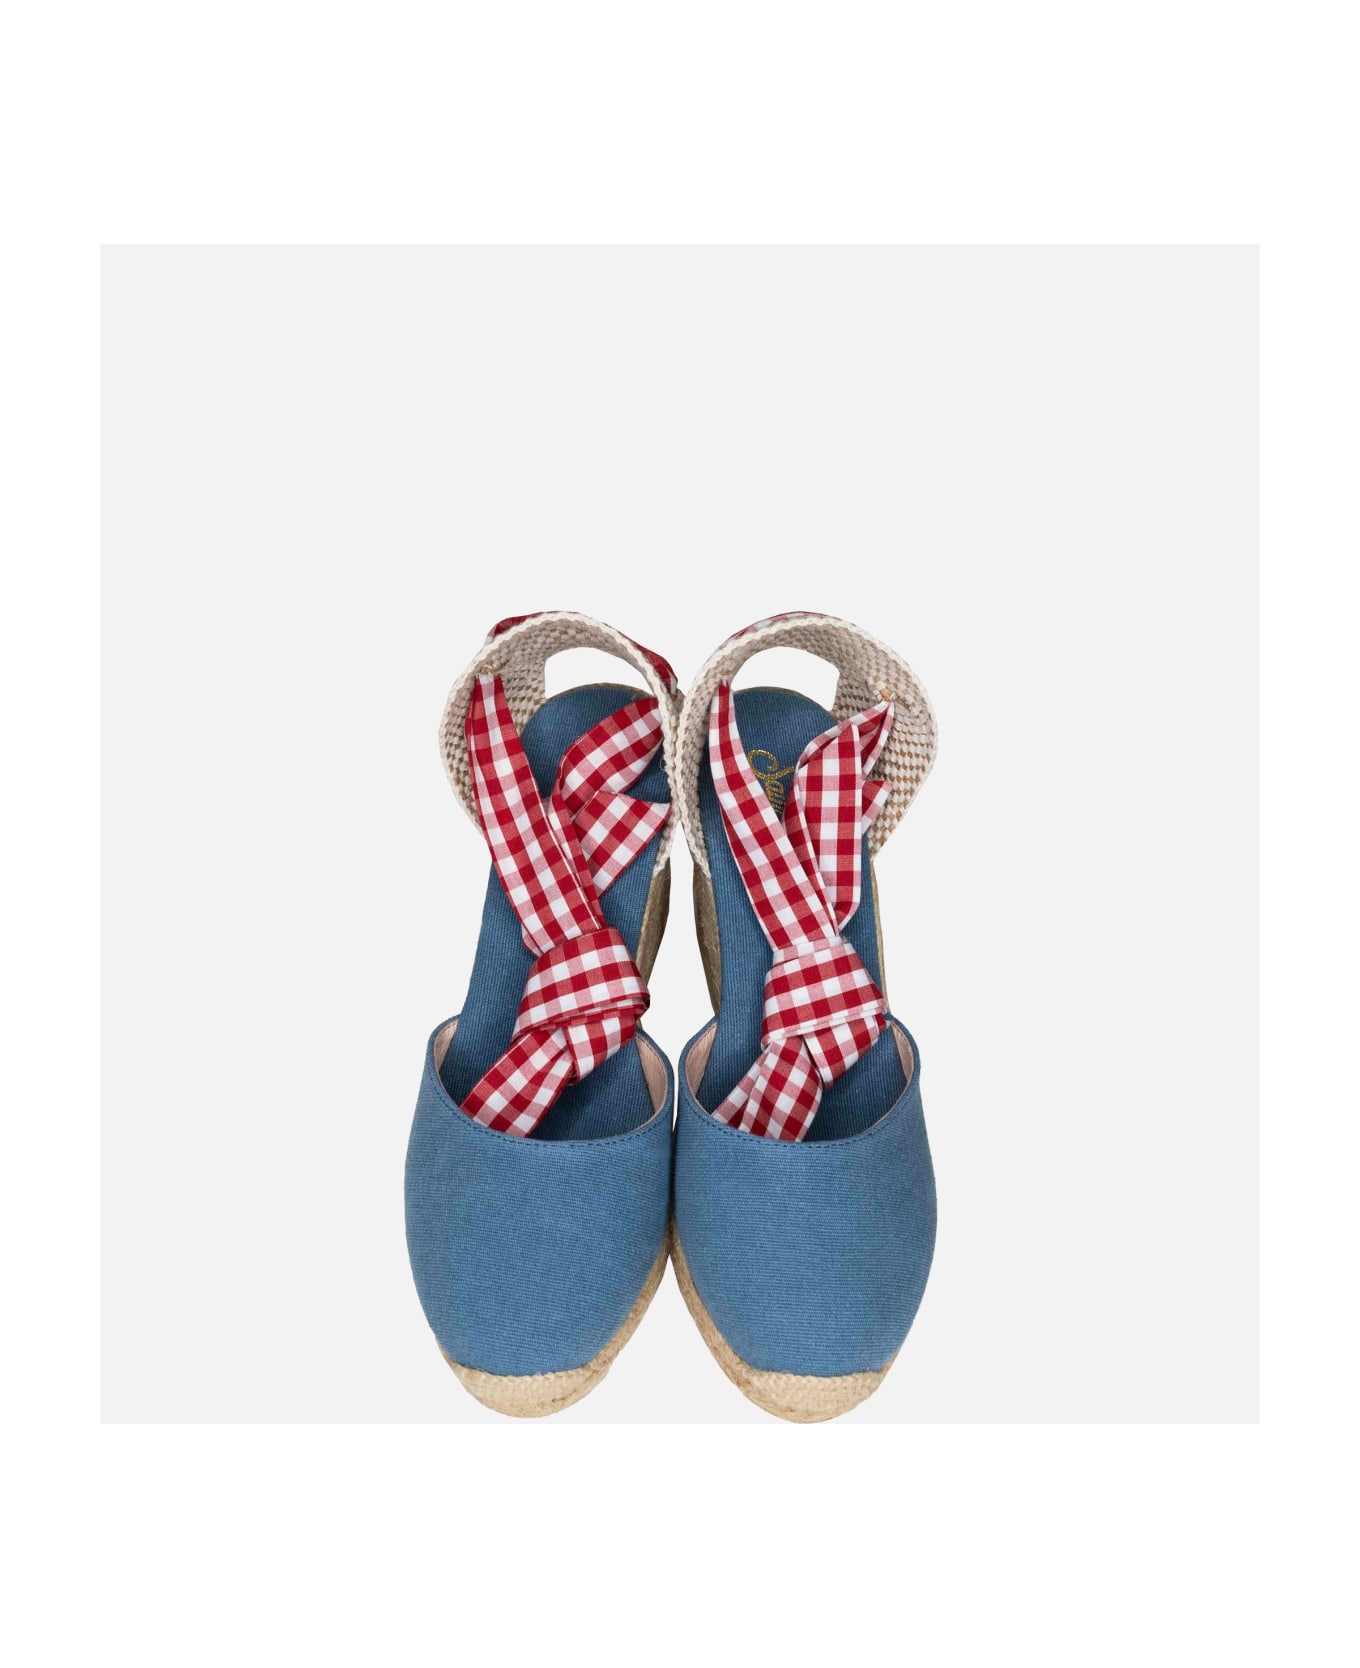 MC2 Saint Barth Blu Print Canvas Espadrillas With Hight Wedge And Ankle Lace - BLUE ウェッジシューズ